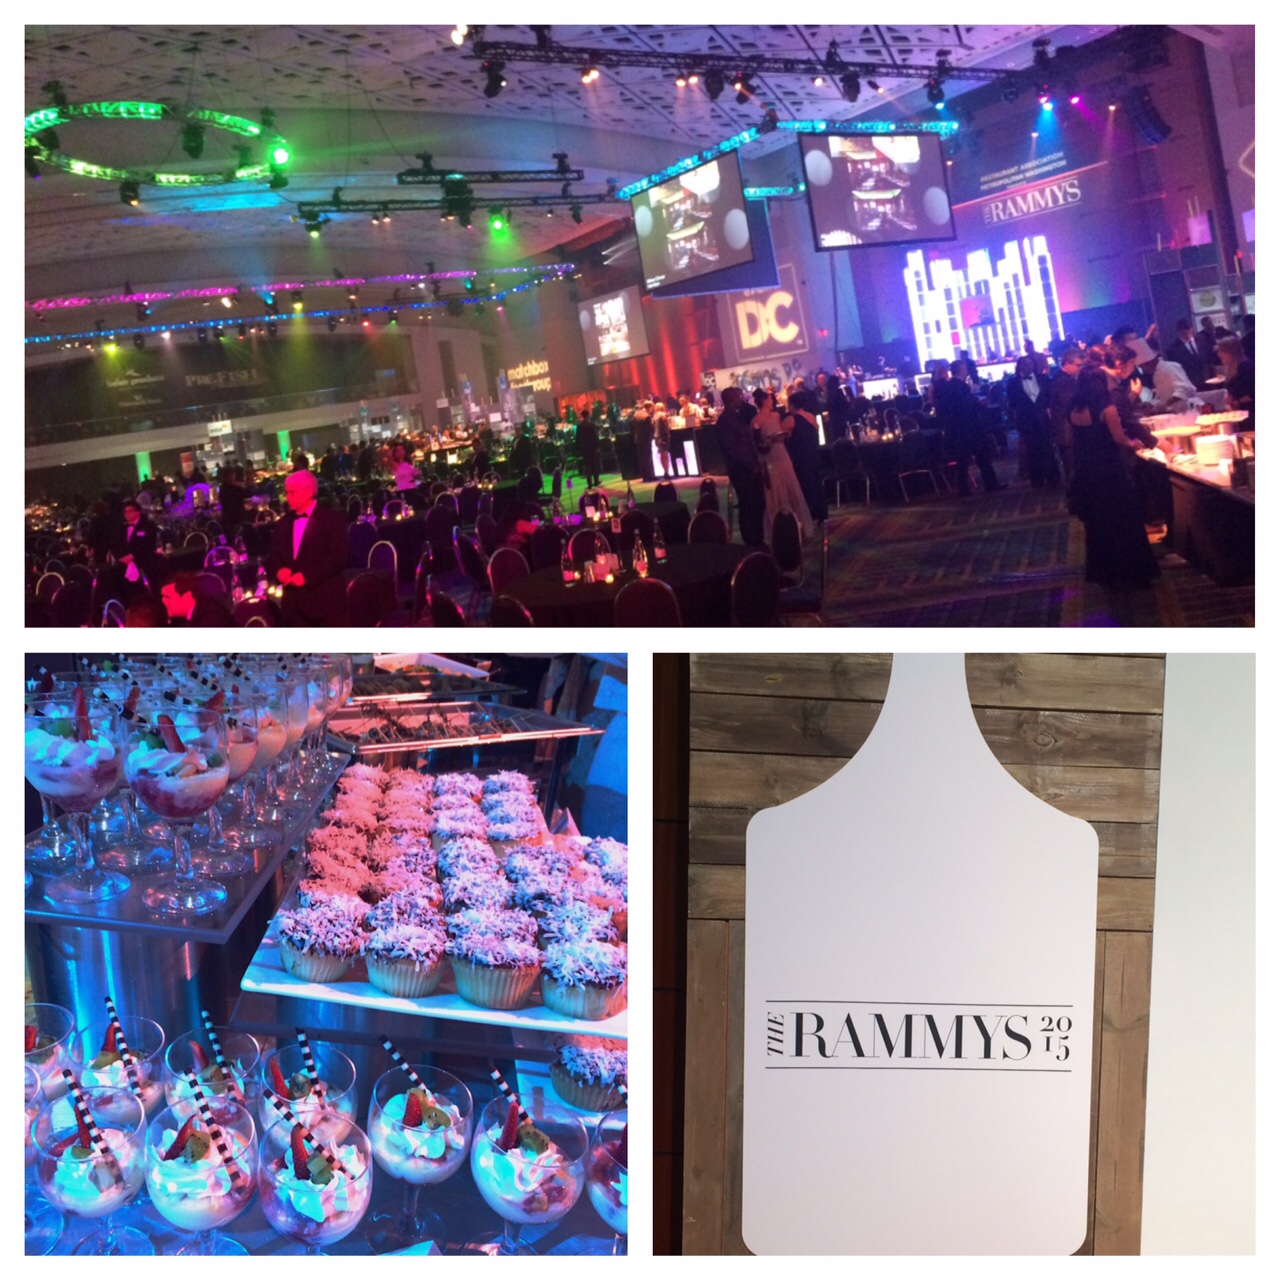 The best of D.C.’s food industry: The 2015 RAMMY Awards